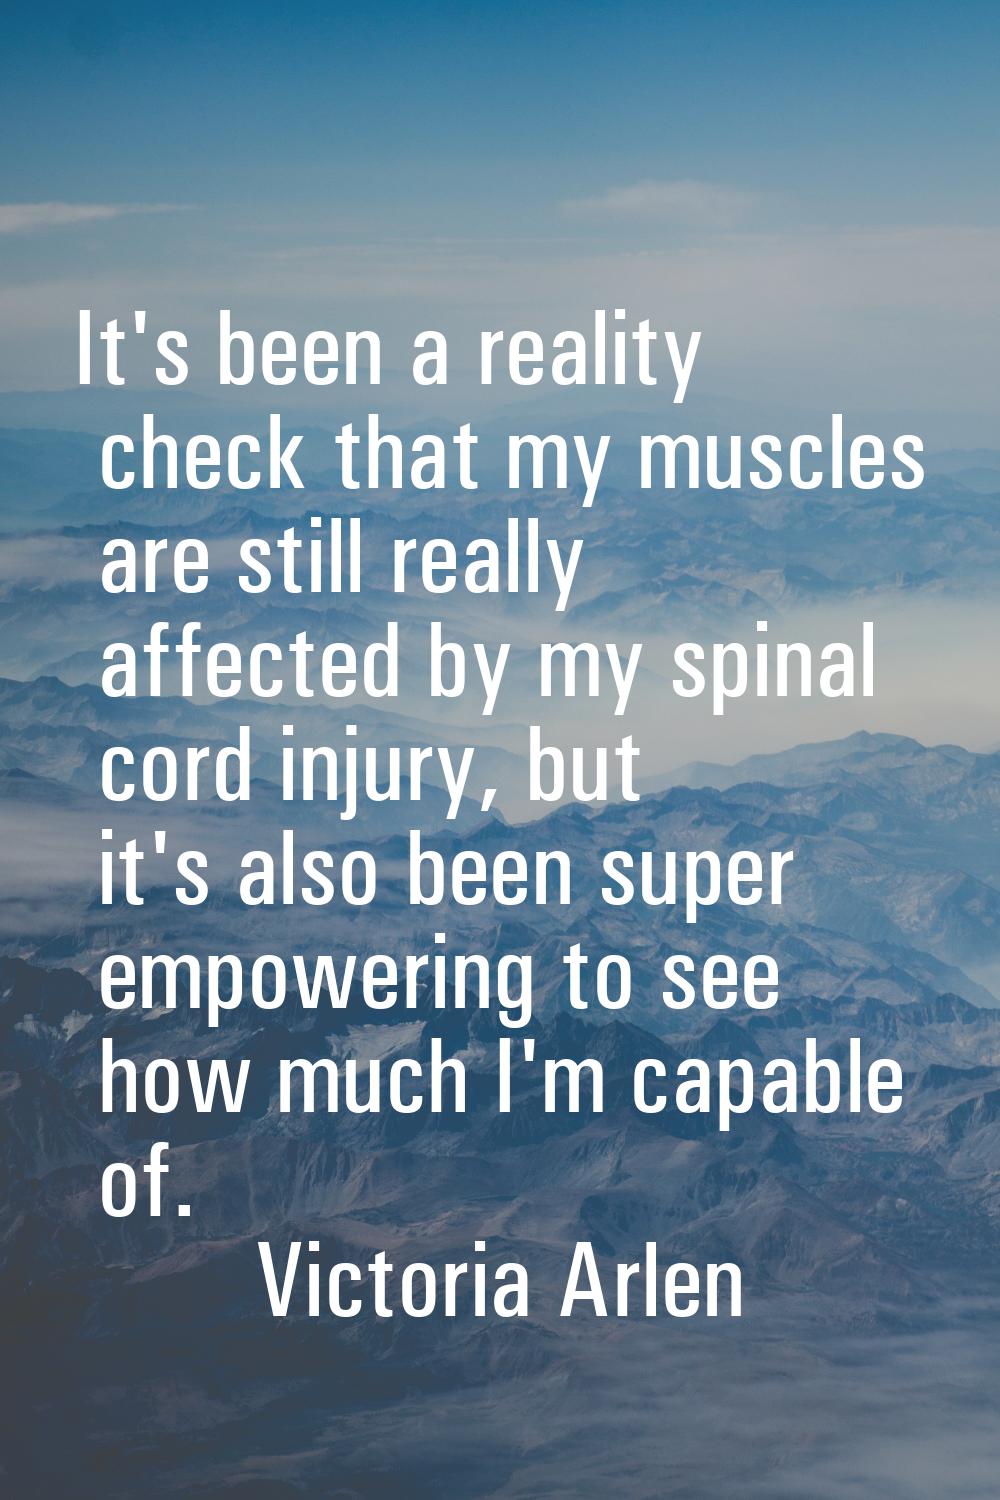 It's been a reality check that my muscles are still really affected by my spinal cord injury, but i